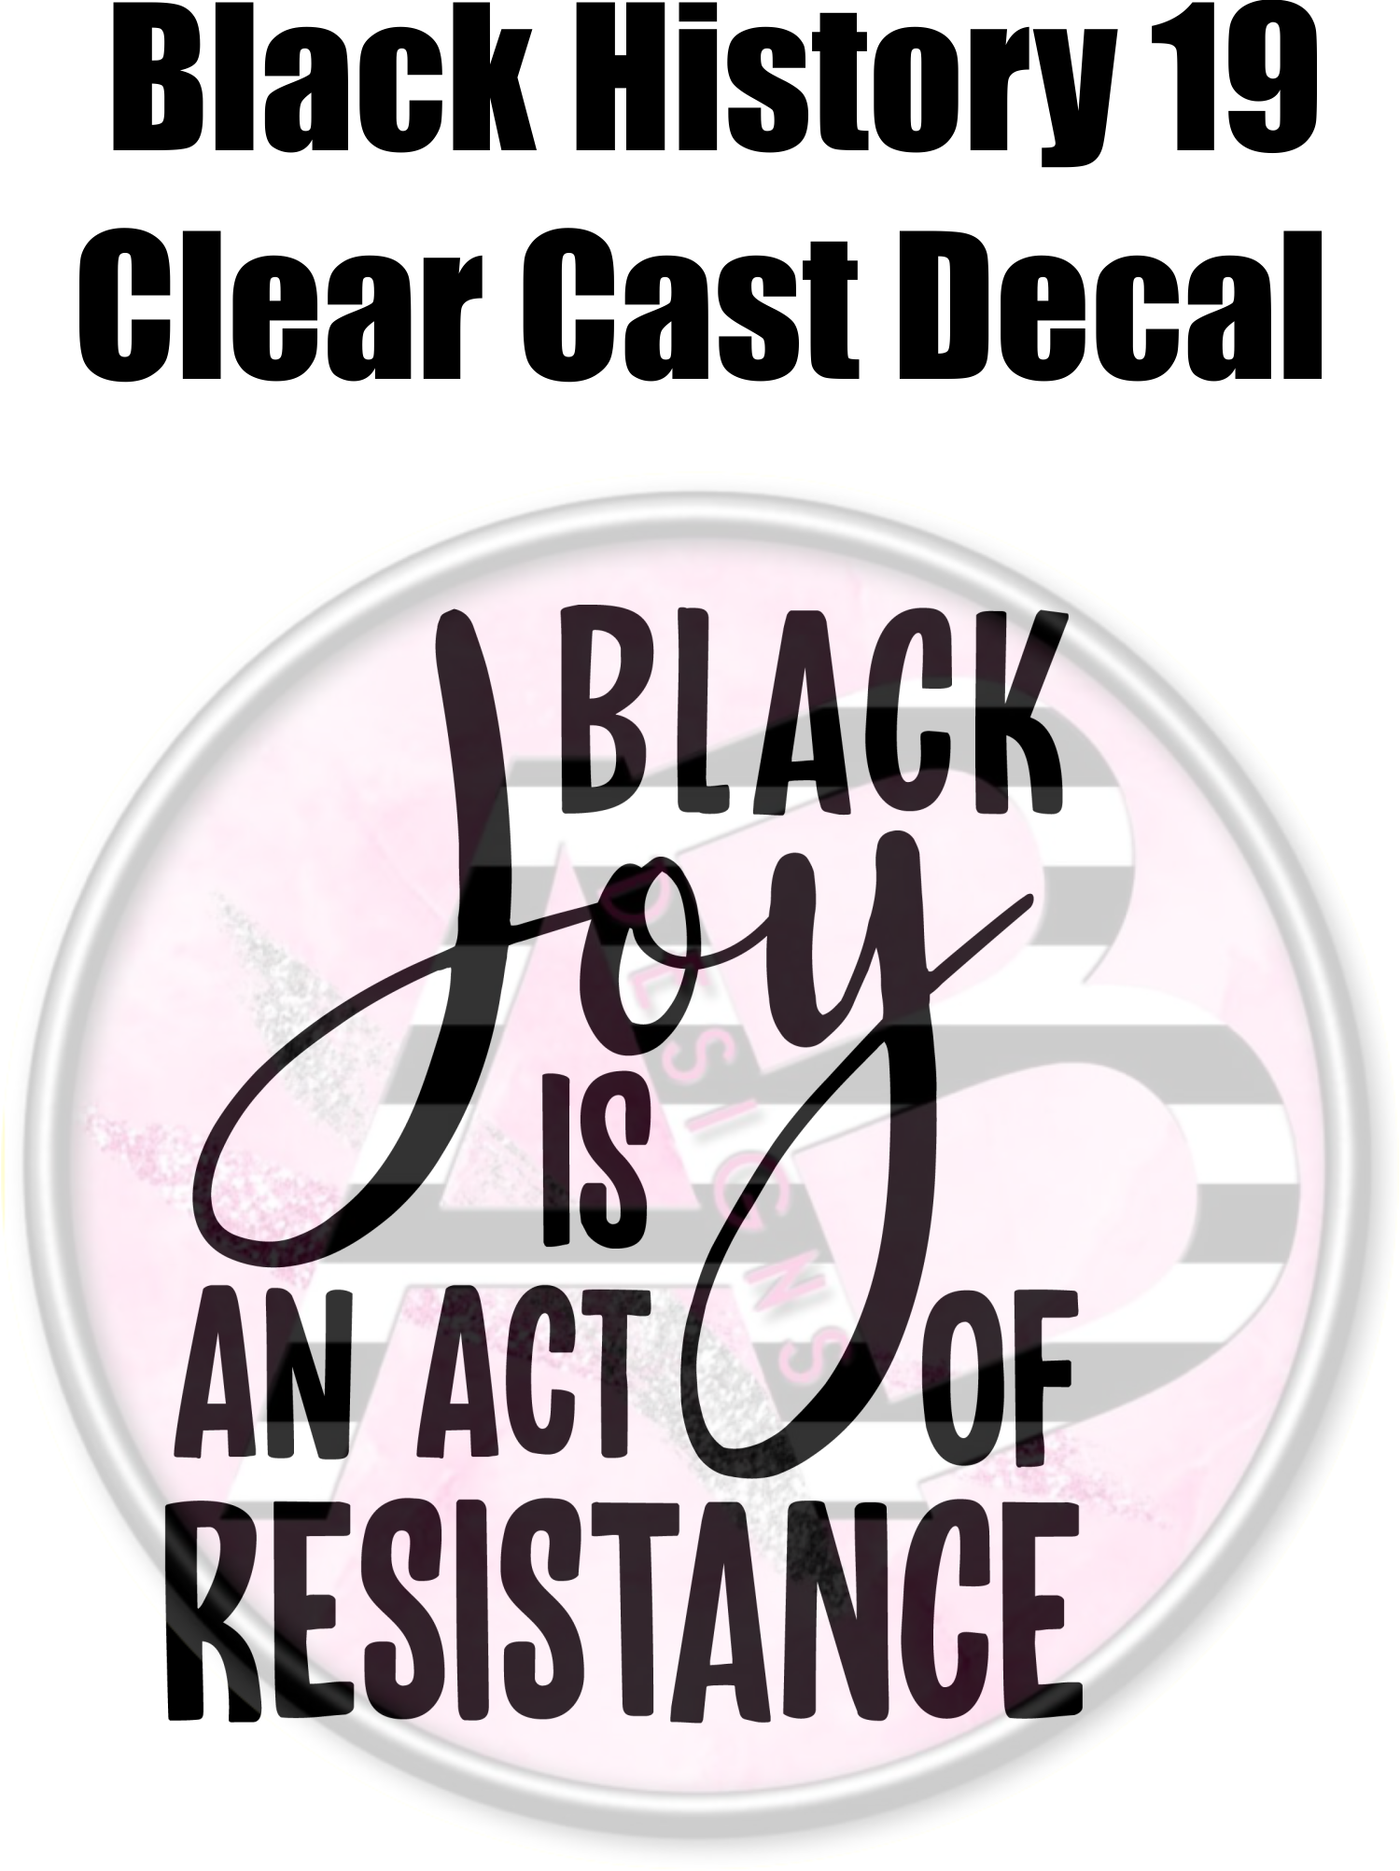 Black History 19 - Clear Cast Decal